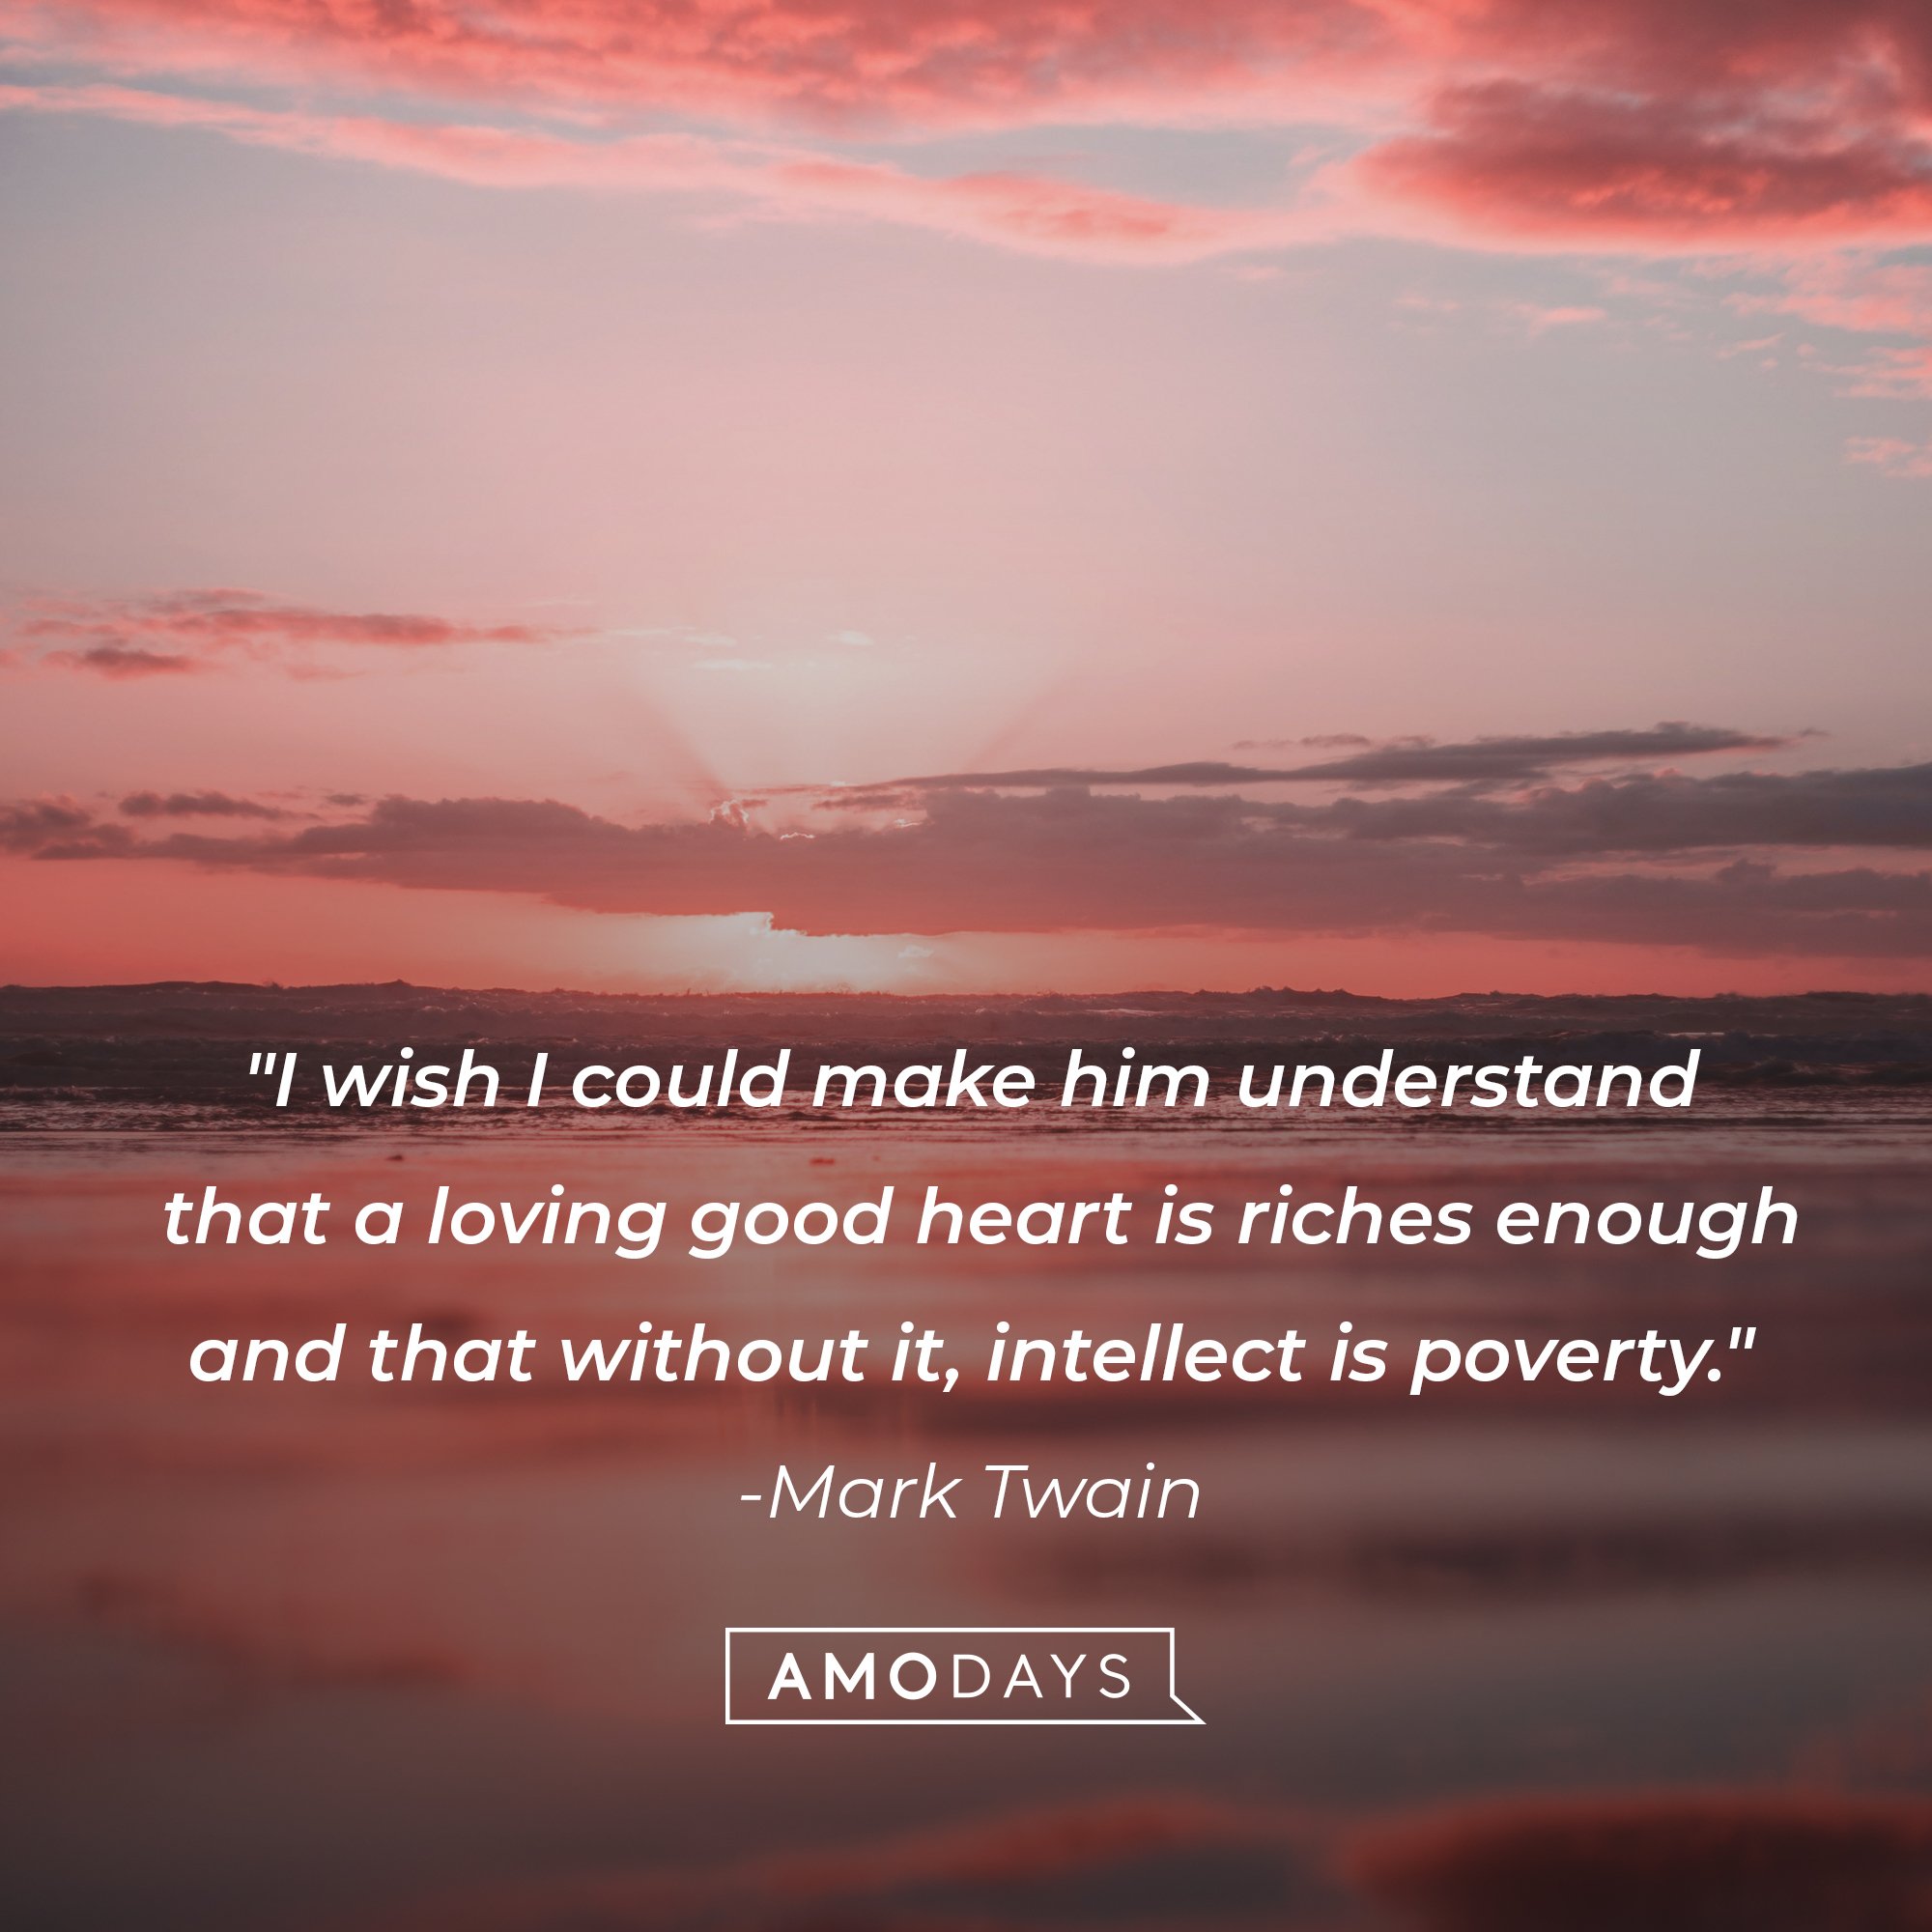 Mark Twain’s quote: "I wish I could make him understand that a loving good heart is riches enough and that without it, intellect is poverty." | Image: AmoDays